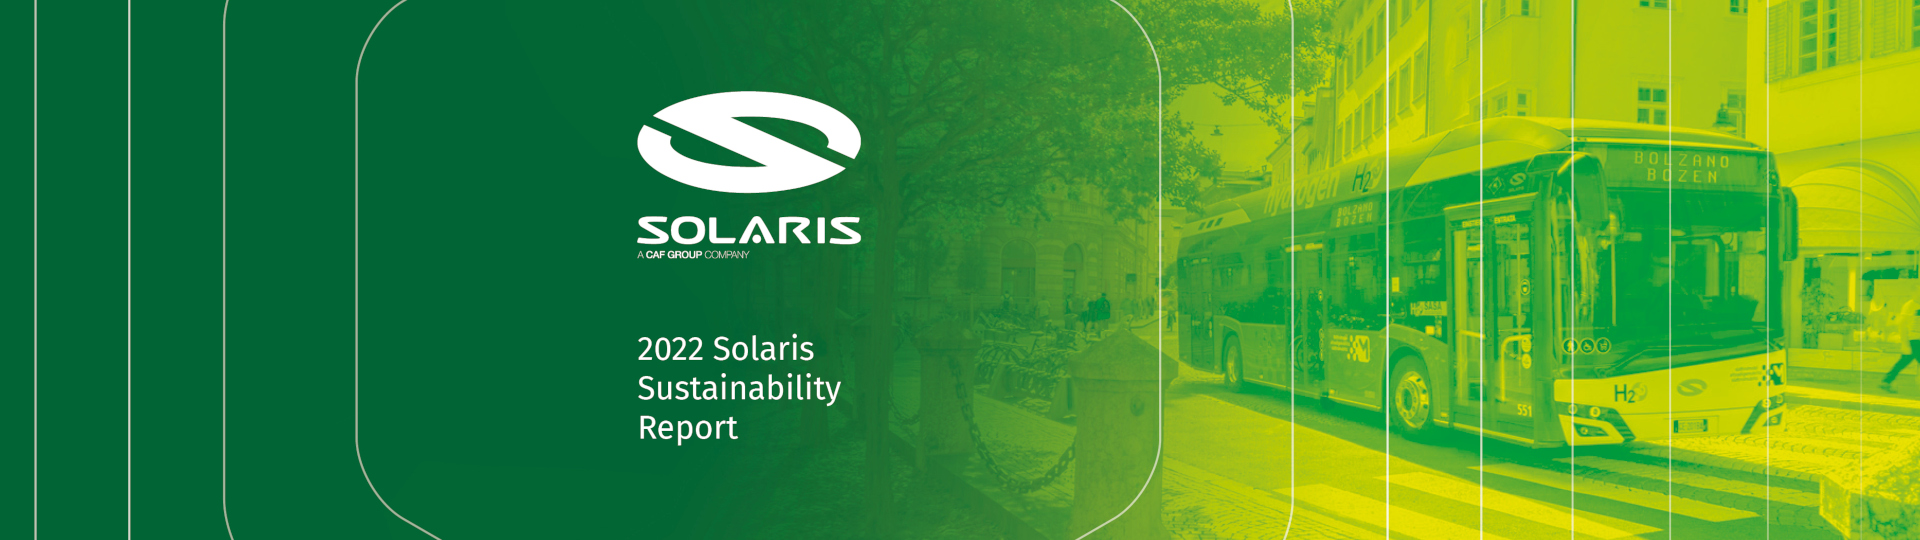 Solaris publishes its Sustainability Report for 2022